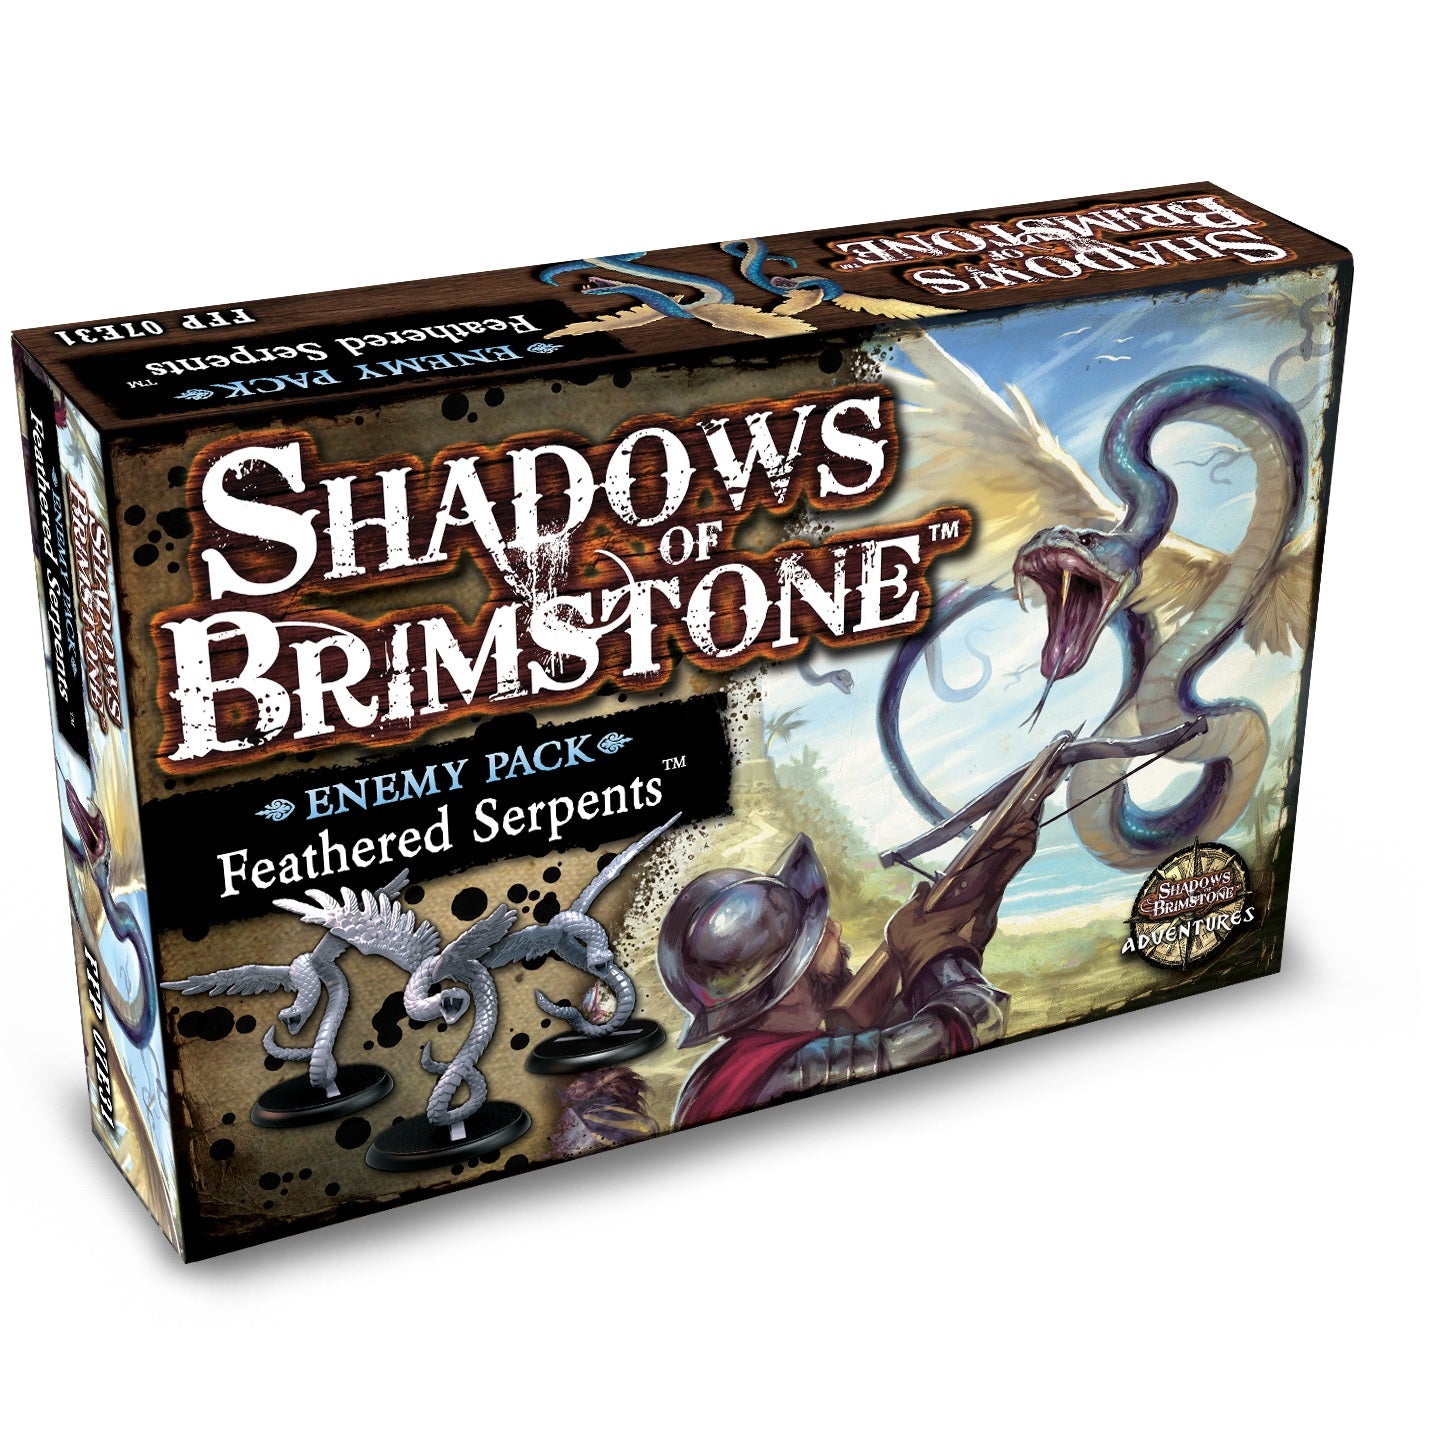 Shadows of Brimstone - Feathered Serpents Enemy Pack